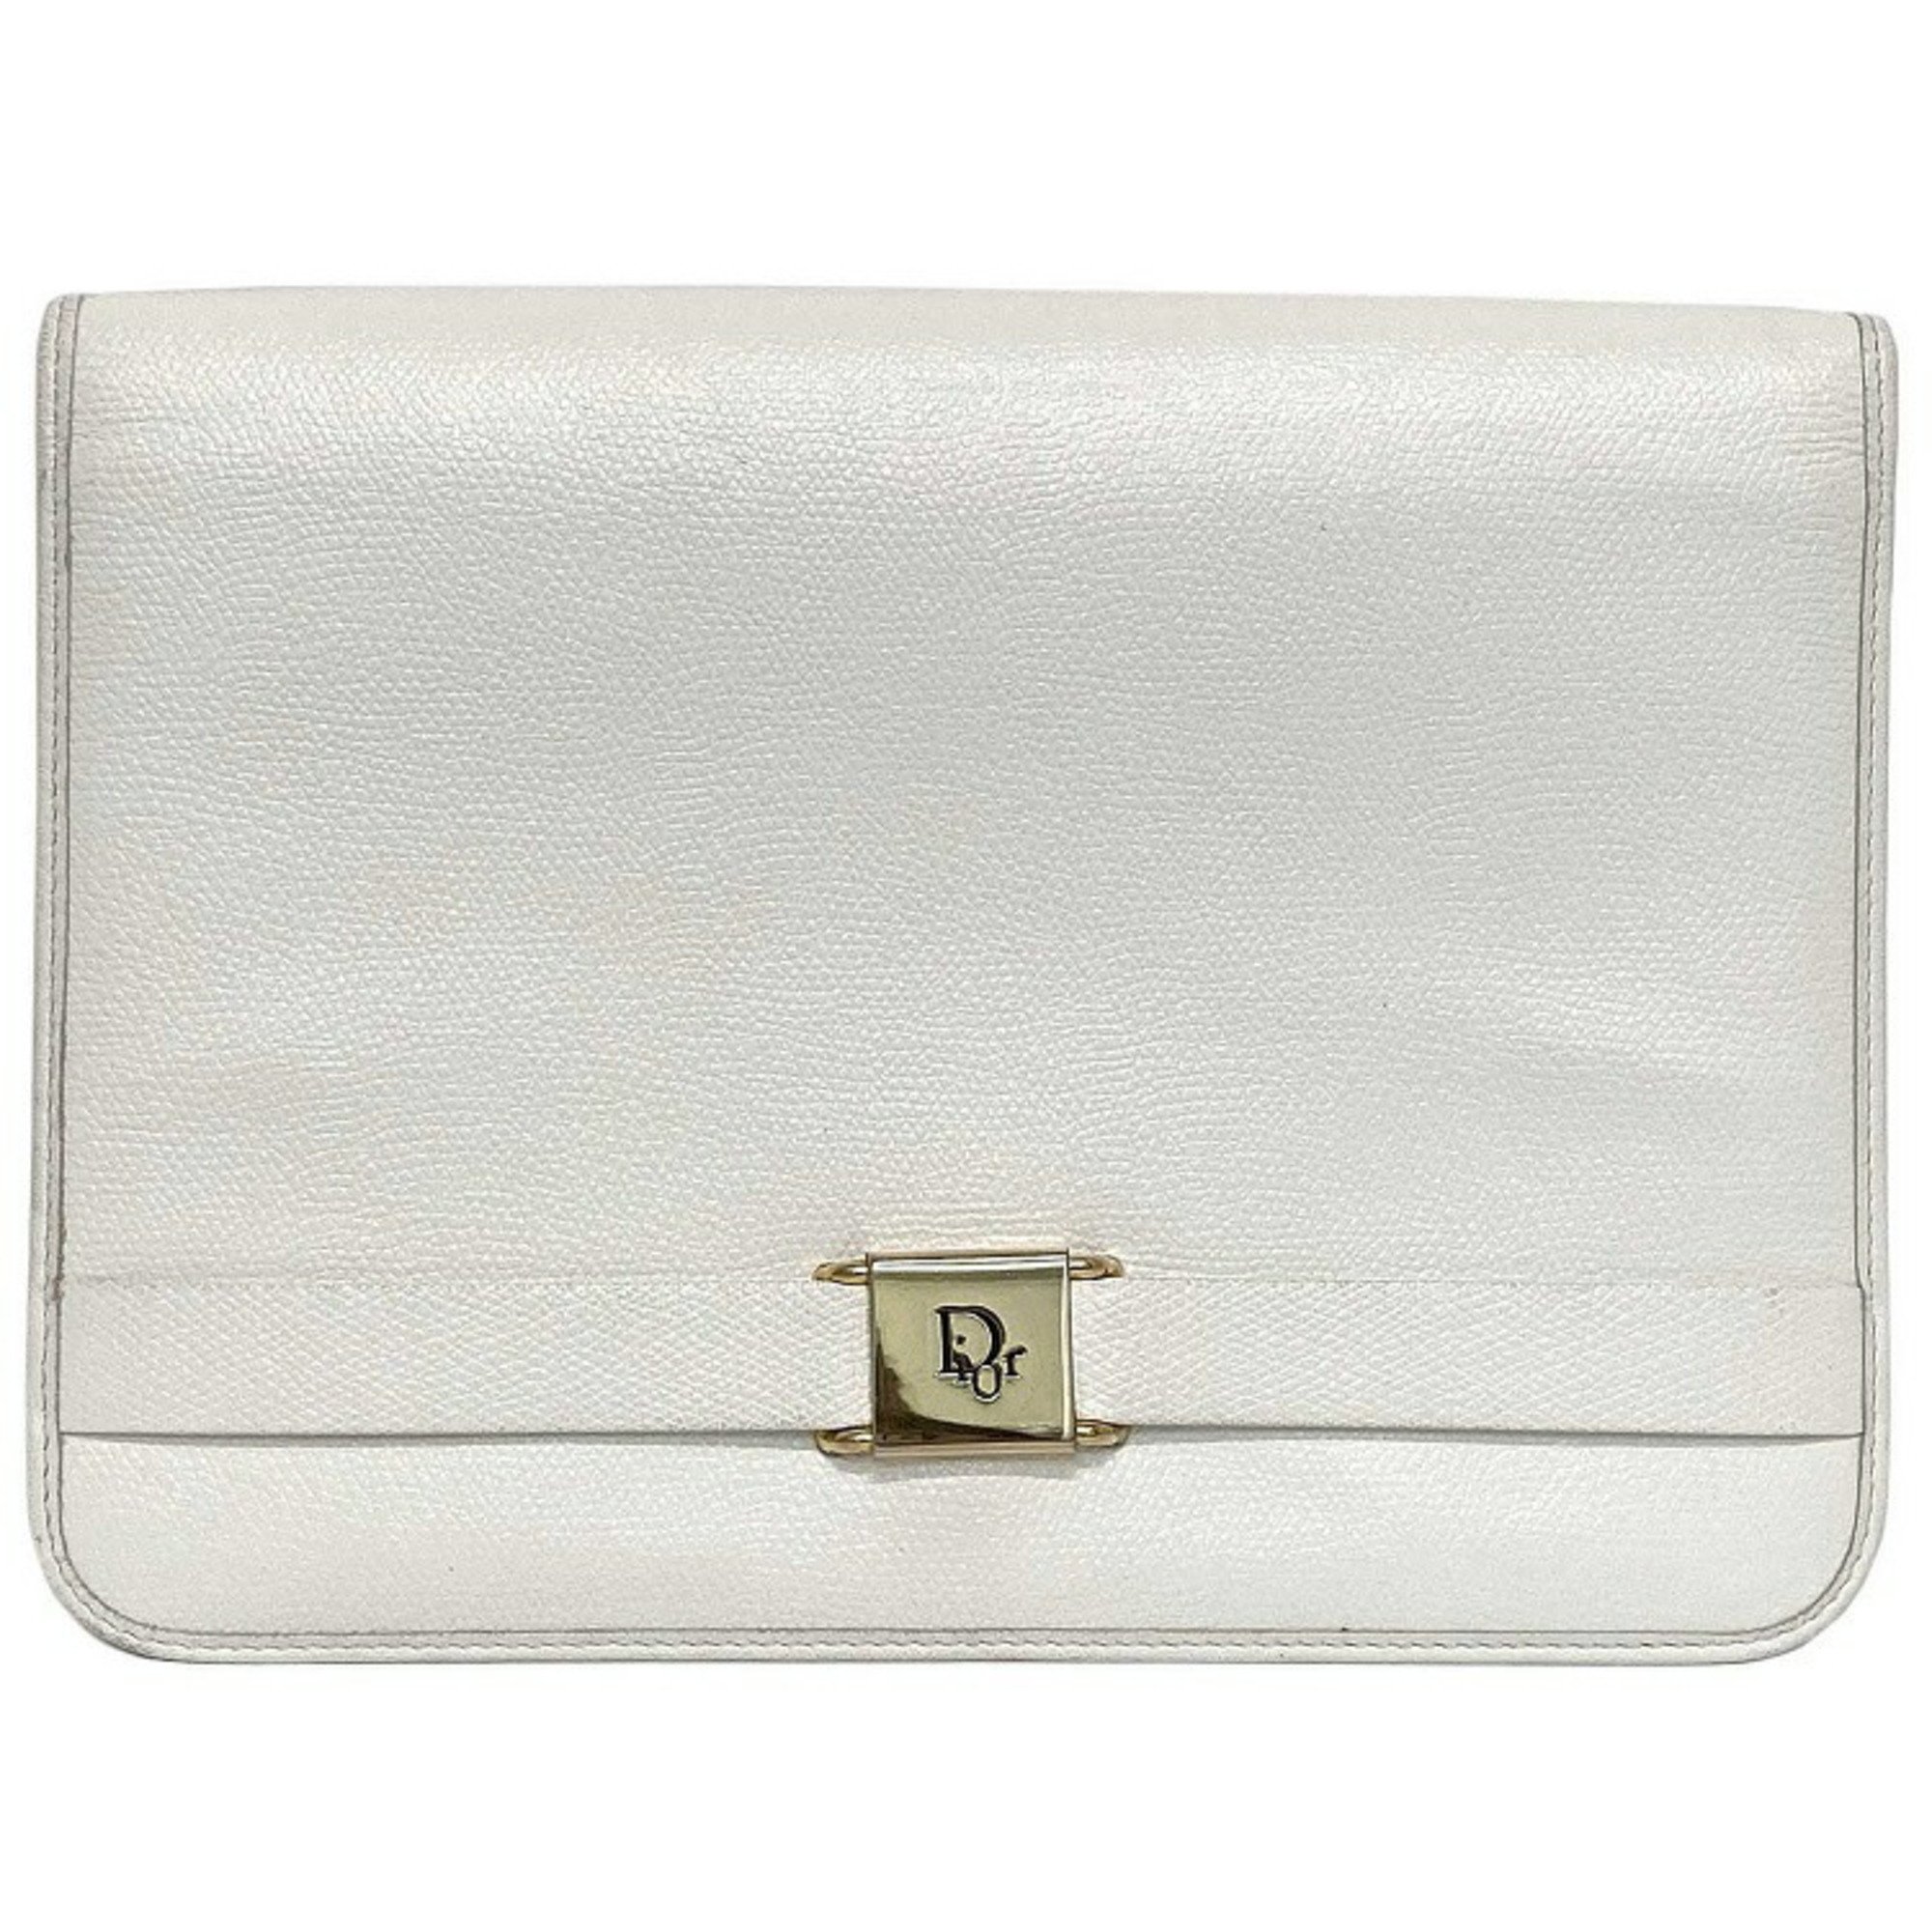 Christian Dior Clutch Bag White Gold Flap Leather Plate Ladies